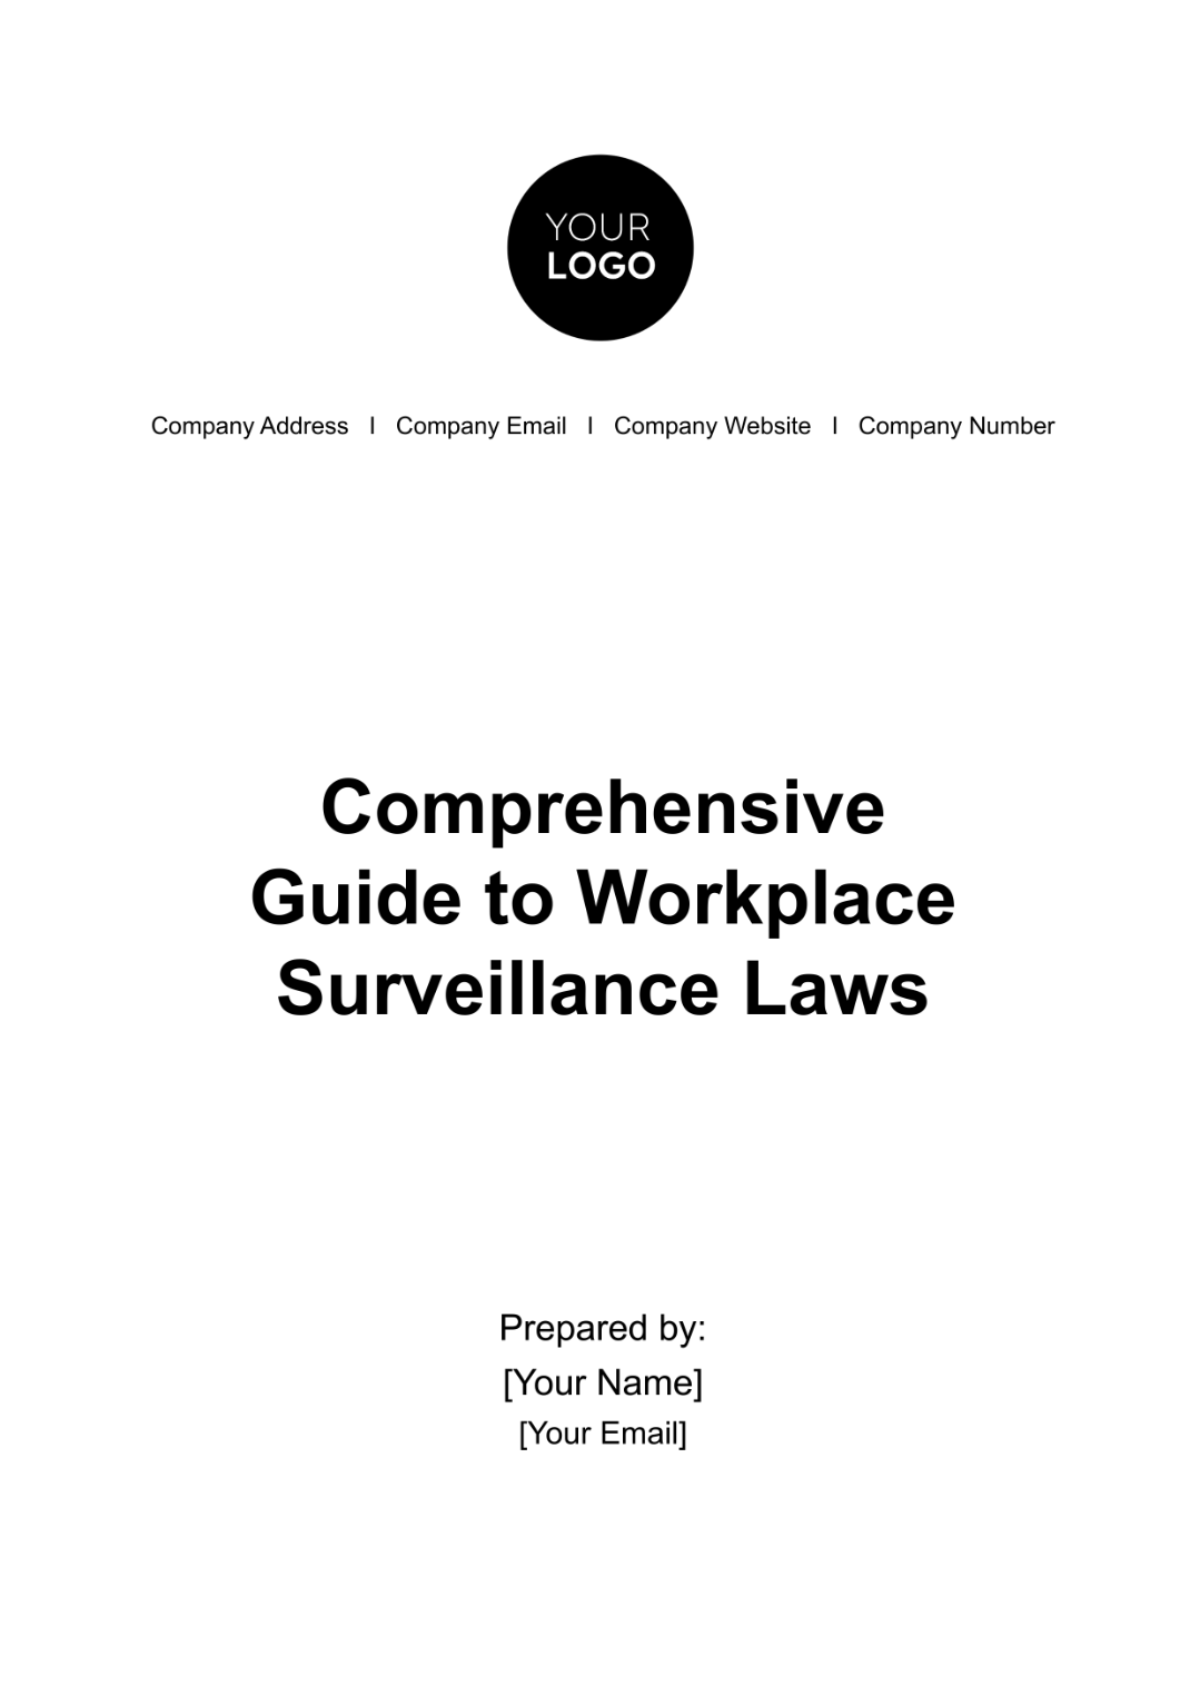 Comprehensive Guide to Workplace Surveillance Laws HR Template